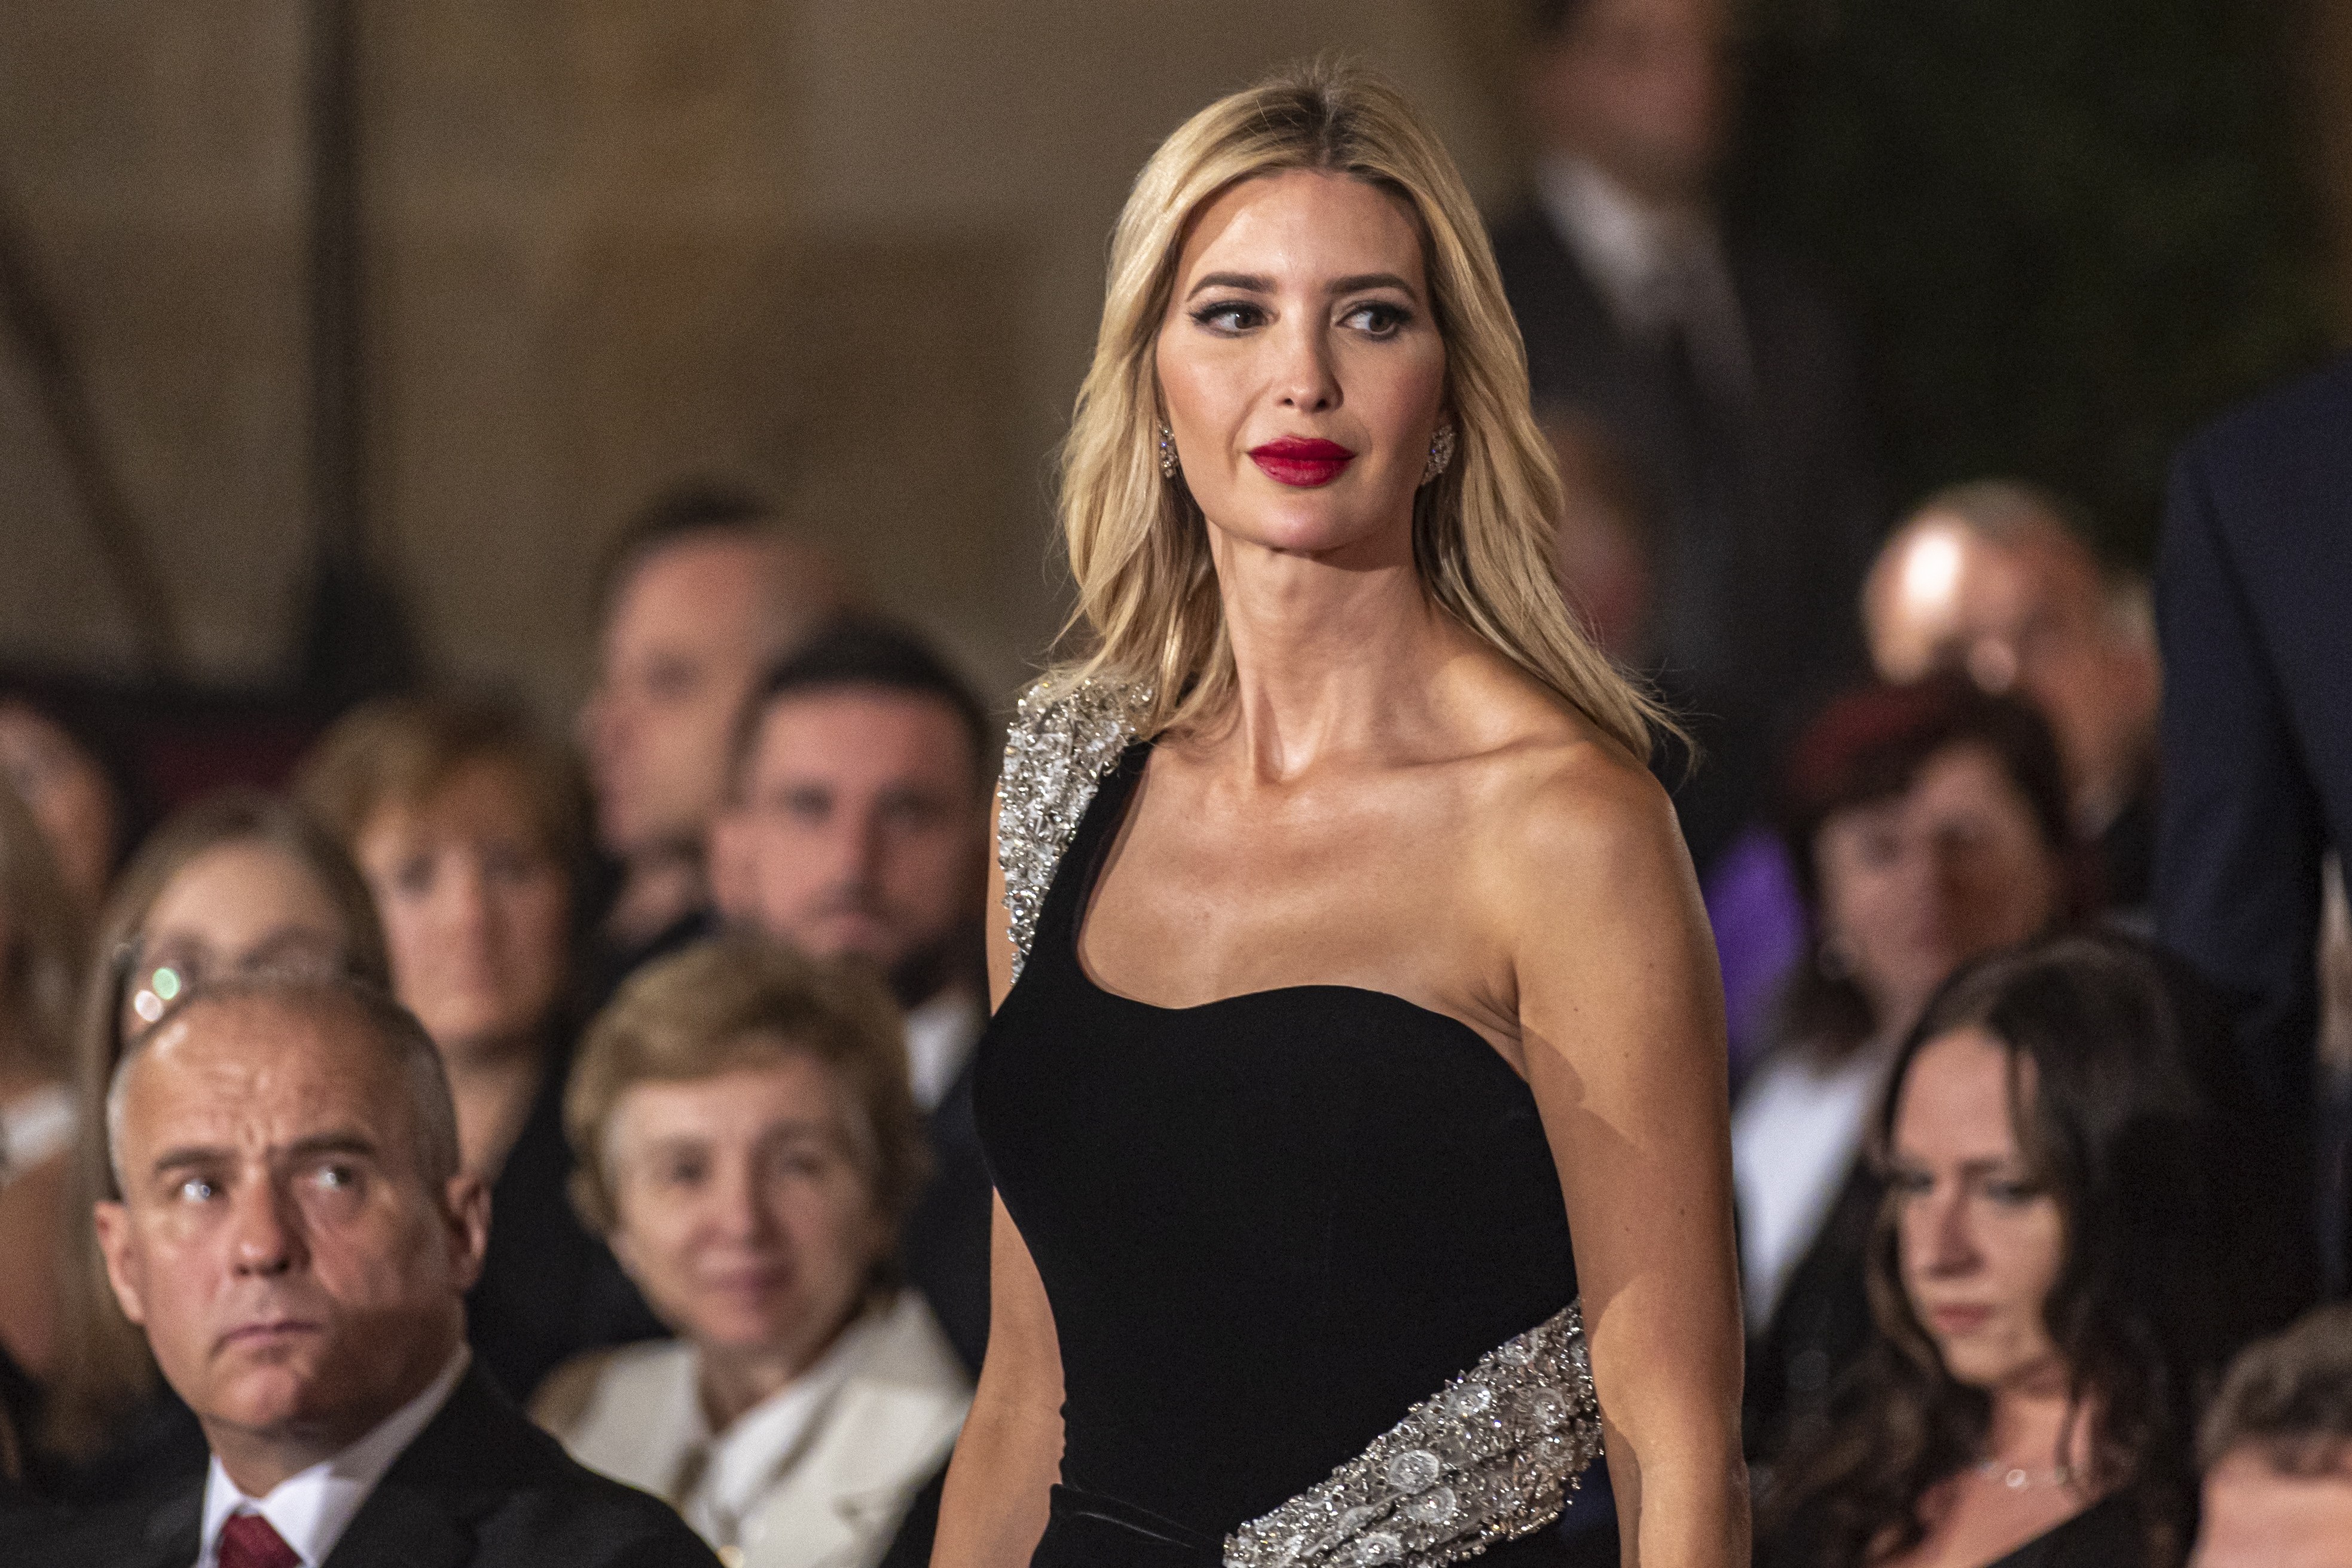 Ivanka Trump was one of New York’s most prominent socialites before her stint in Donald Trump’s White House – so can she make a comeback?  Photo: EPA-EFE